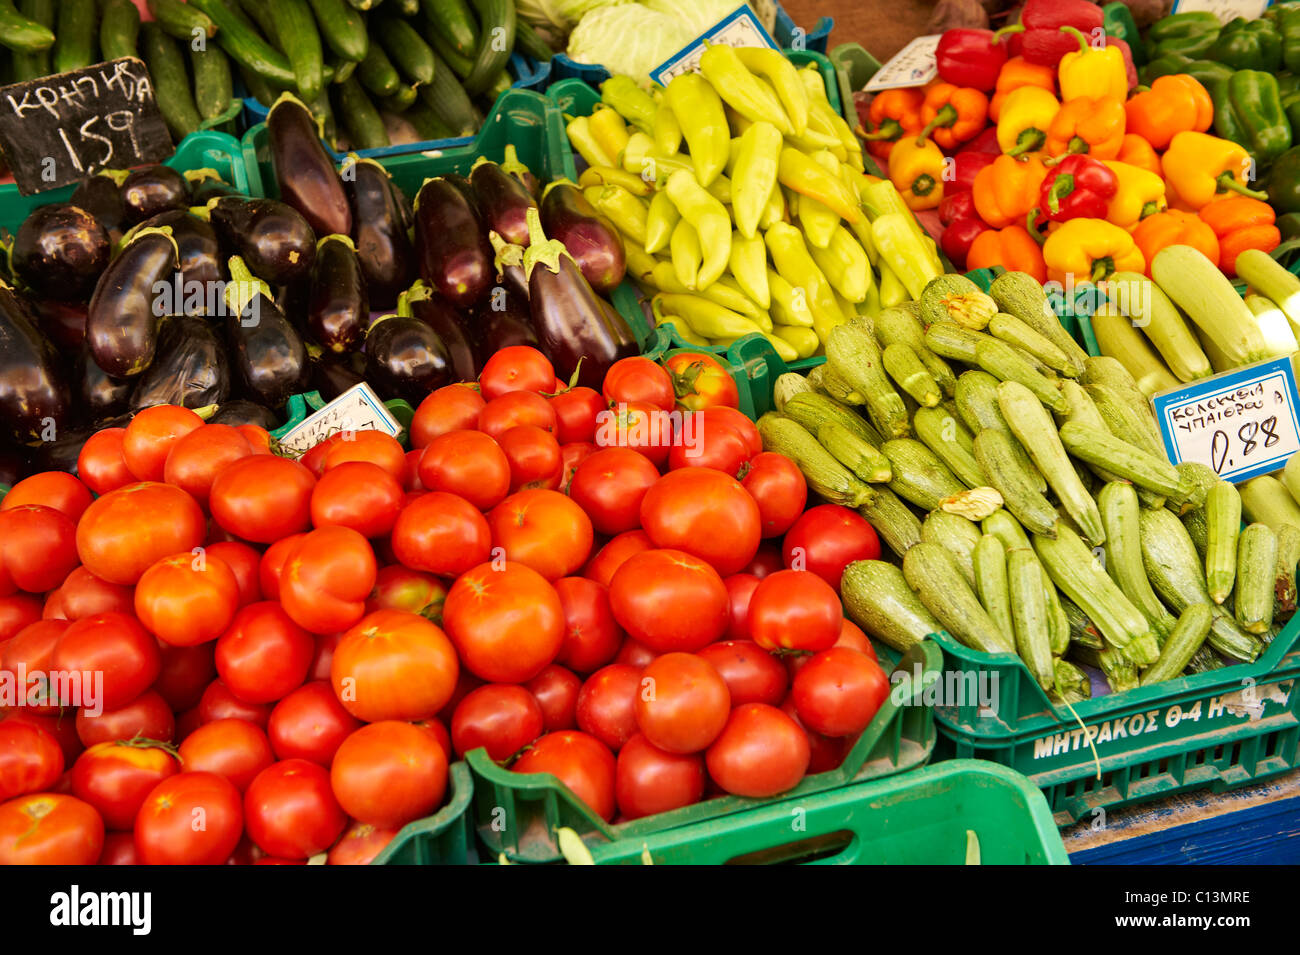 Fresh vegetables on a market stall in a market Stock Photo